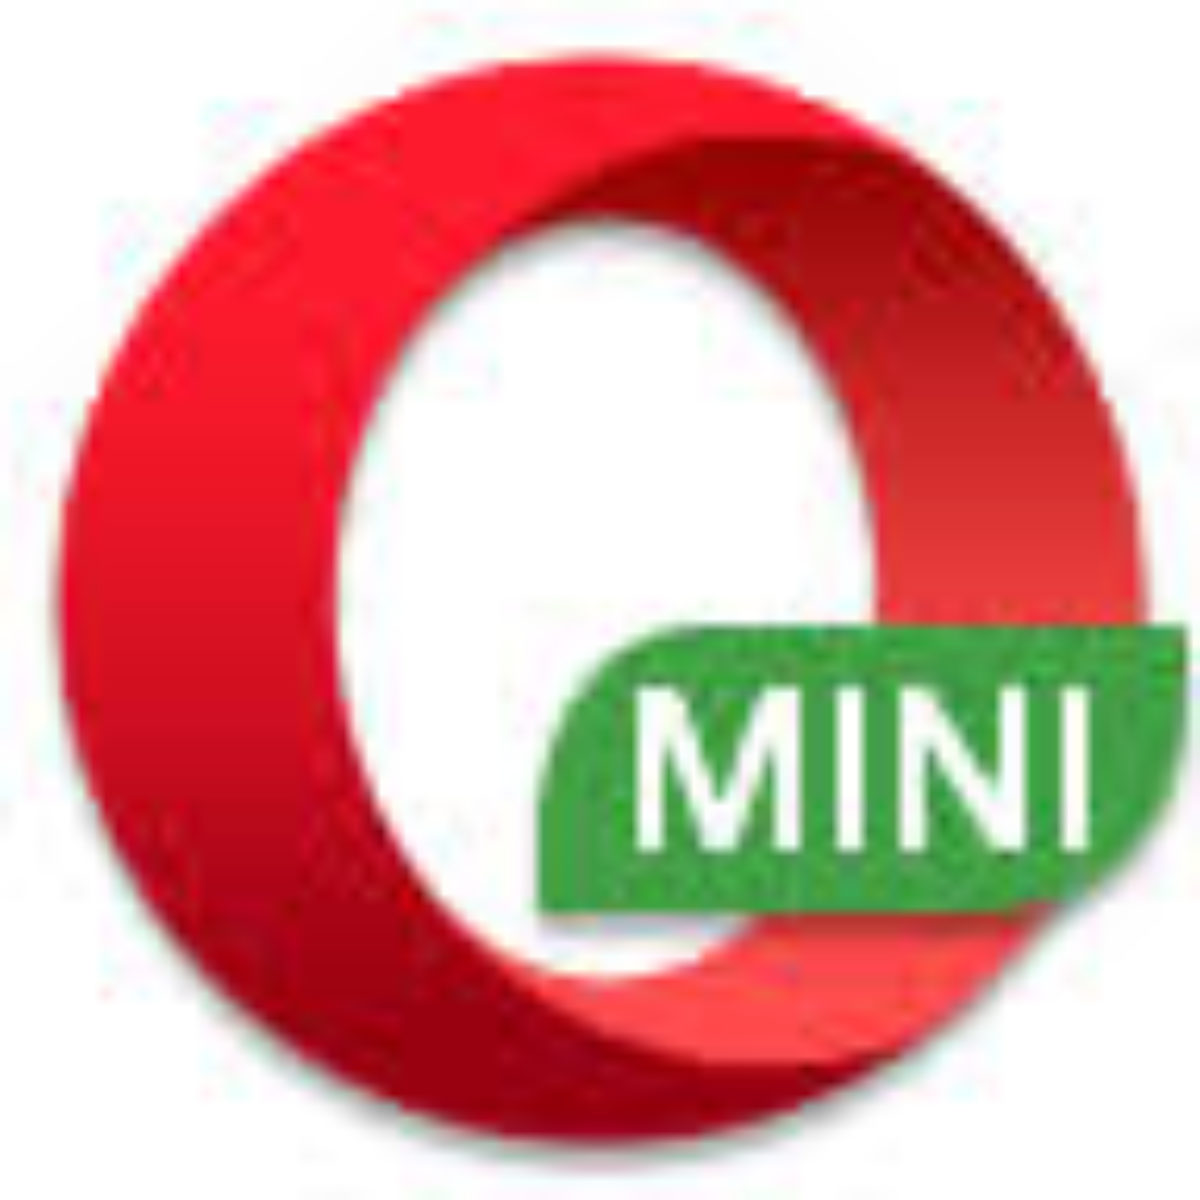 Opera Mini Apk 56 0 2254 57357 For Android Download